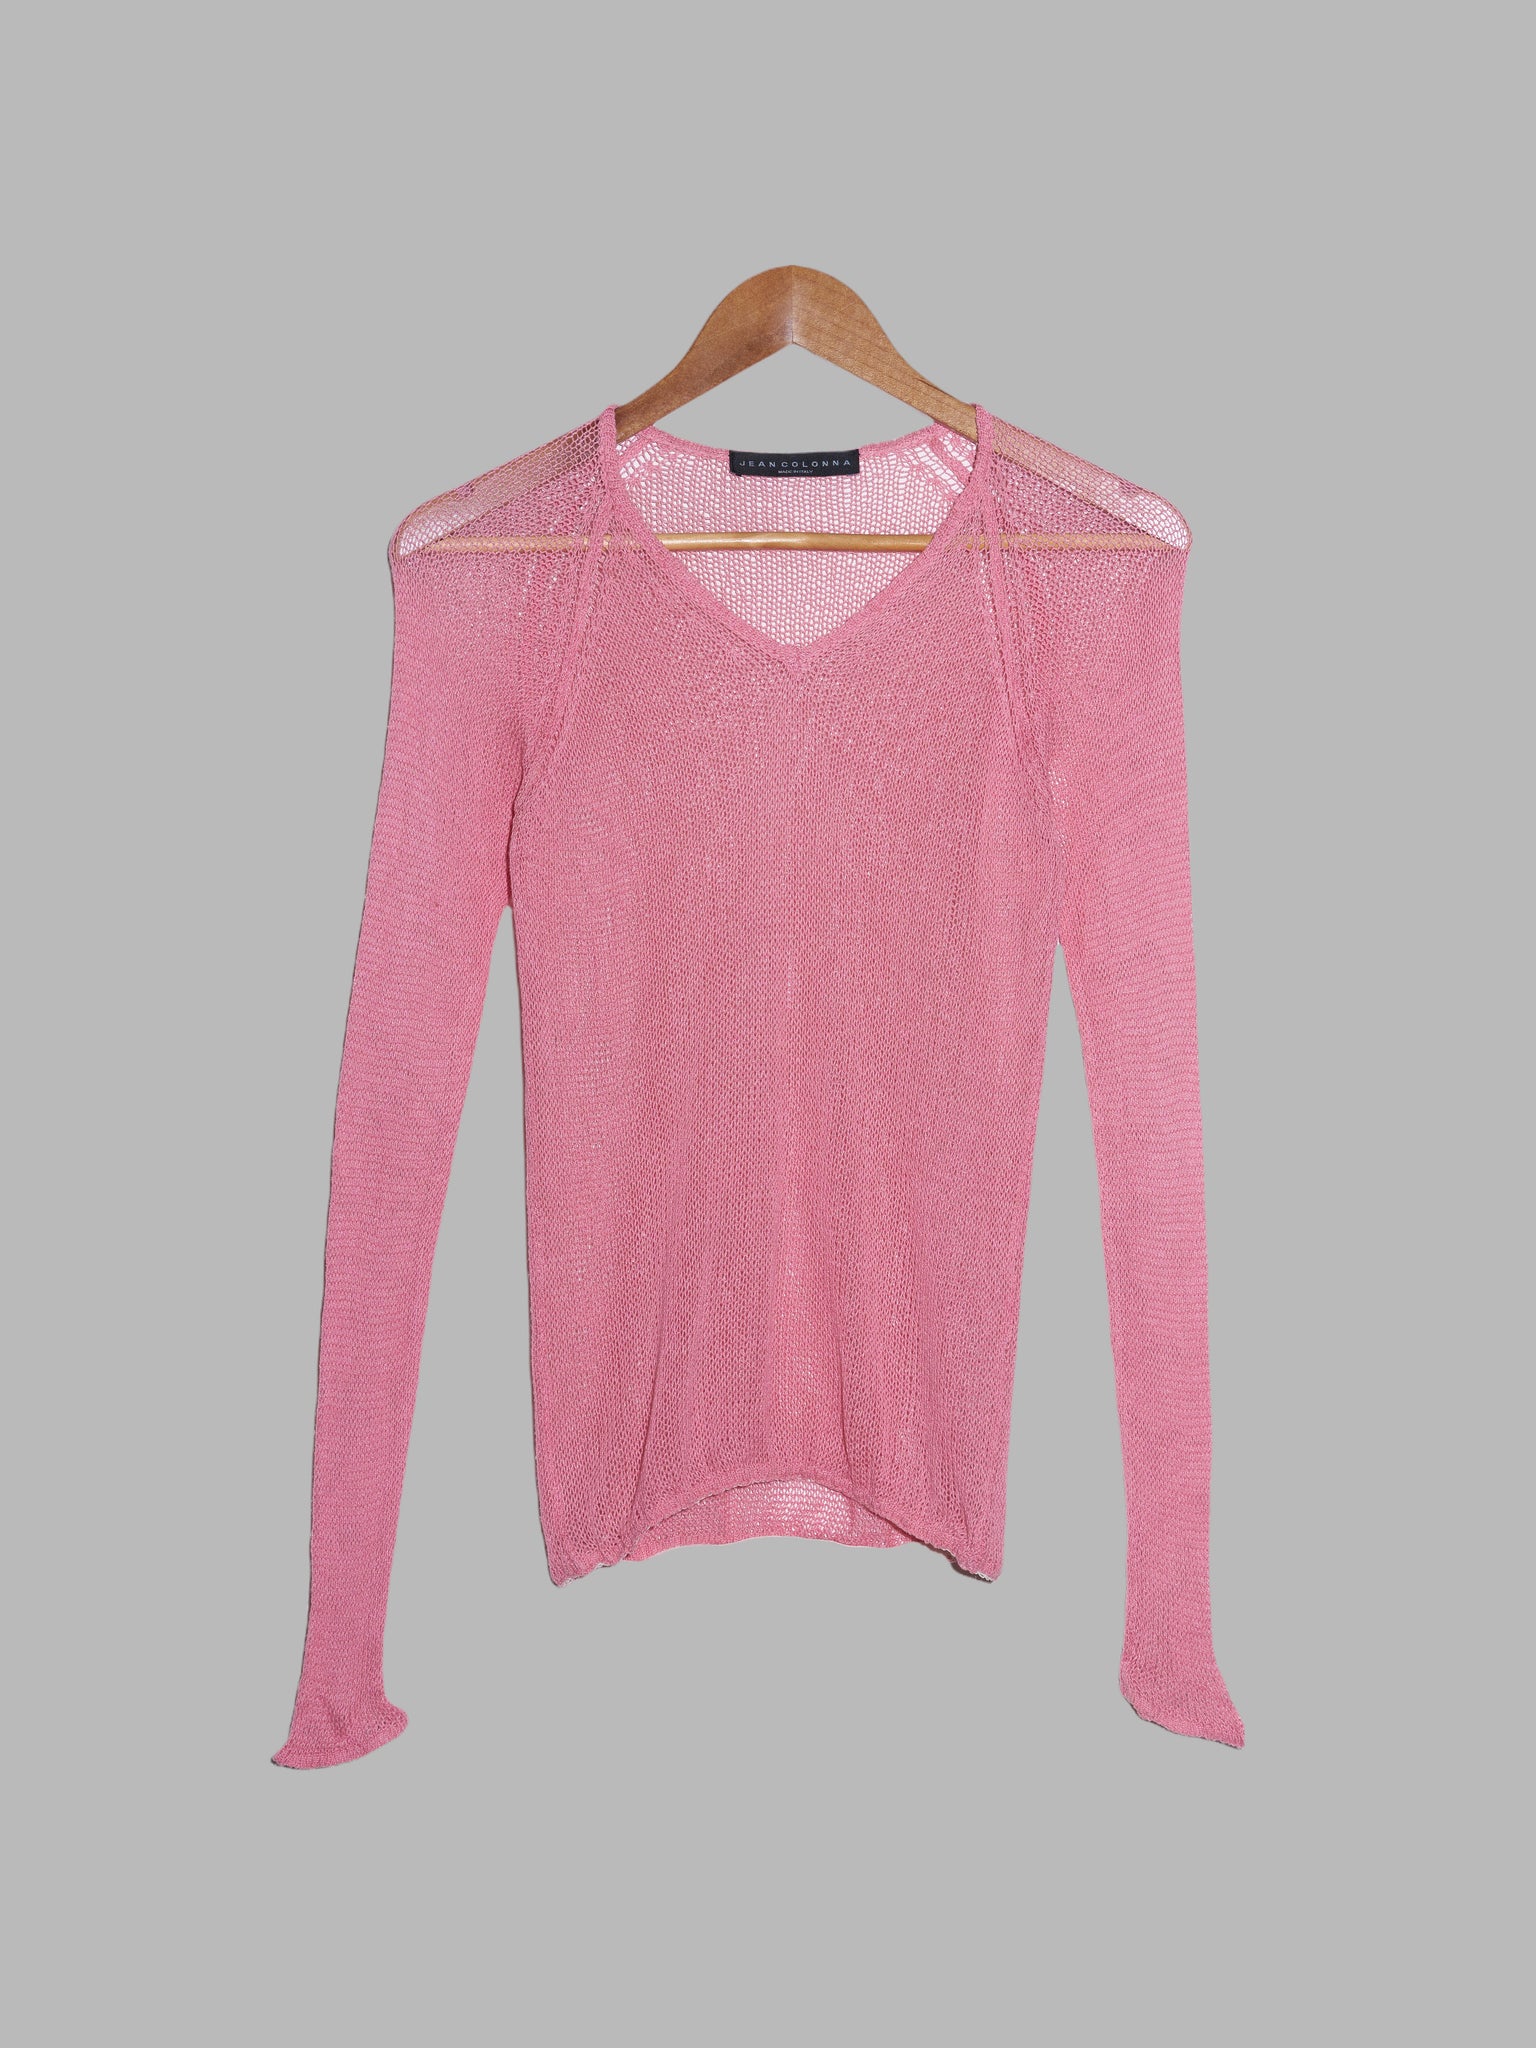 Jean Colonna AW1998 pink silk loose knit long sleeve top - XS